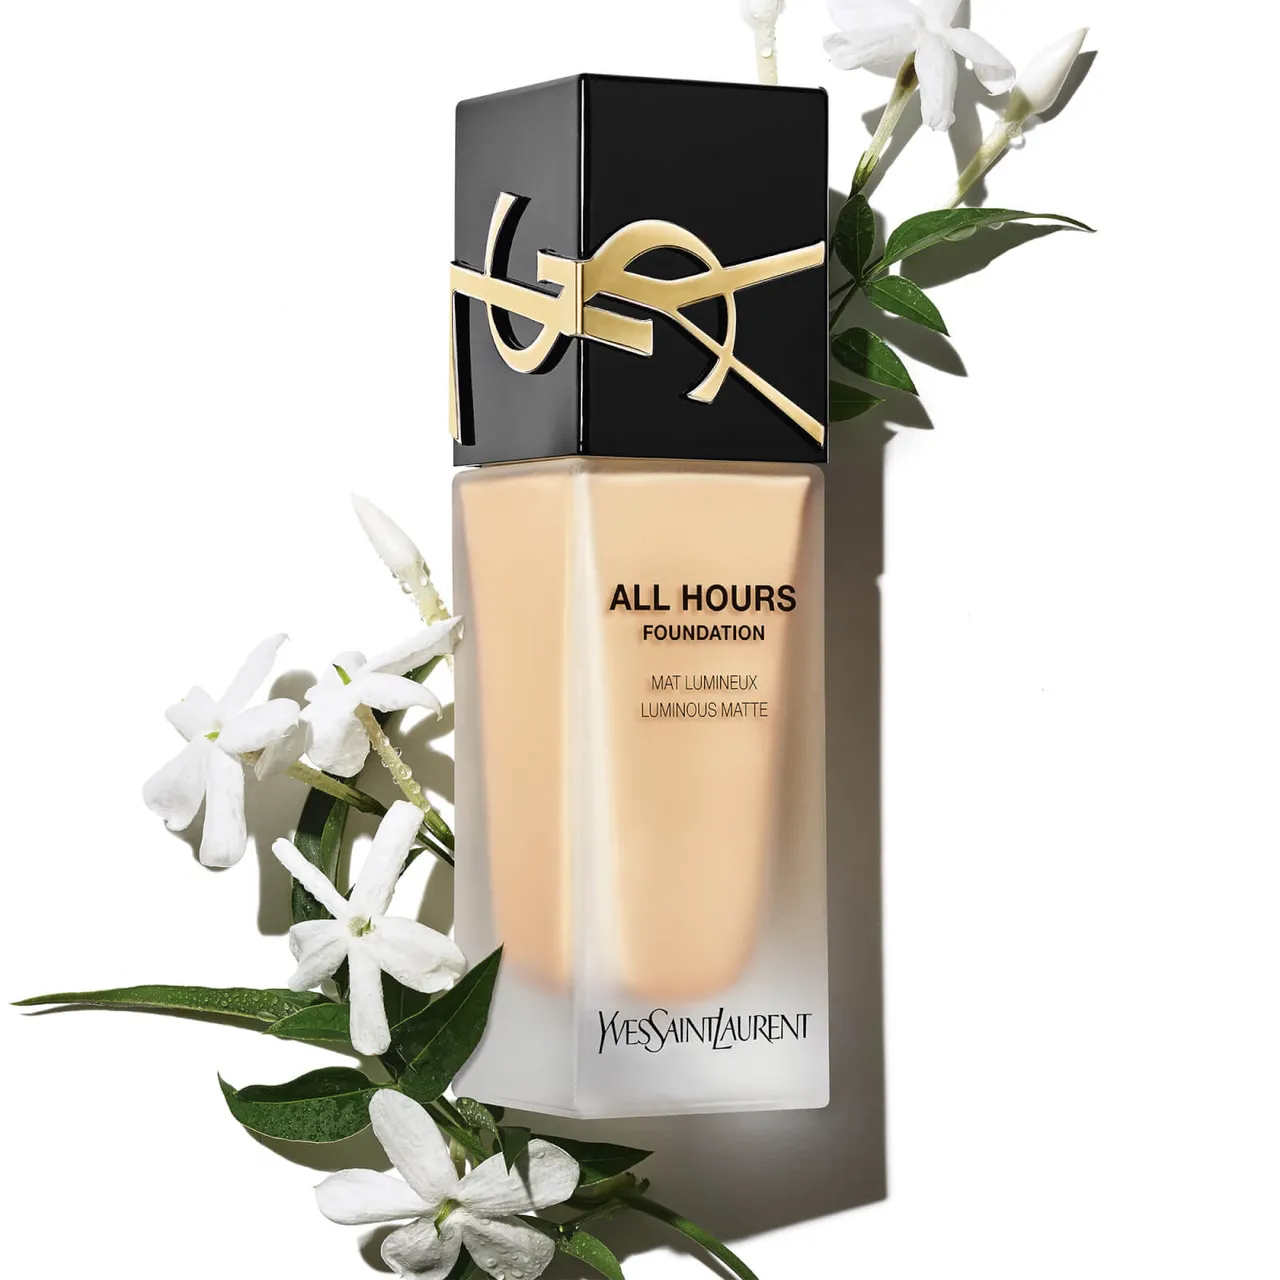 Yves Saint Laurent All Hours Luminous Matte Foundation with SPF 39 25ml (Various Shades) - LW7